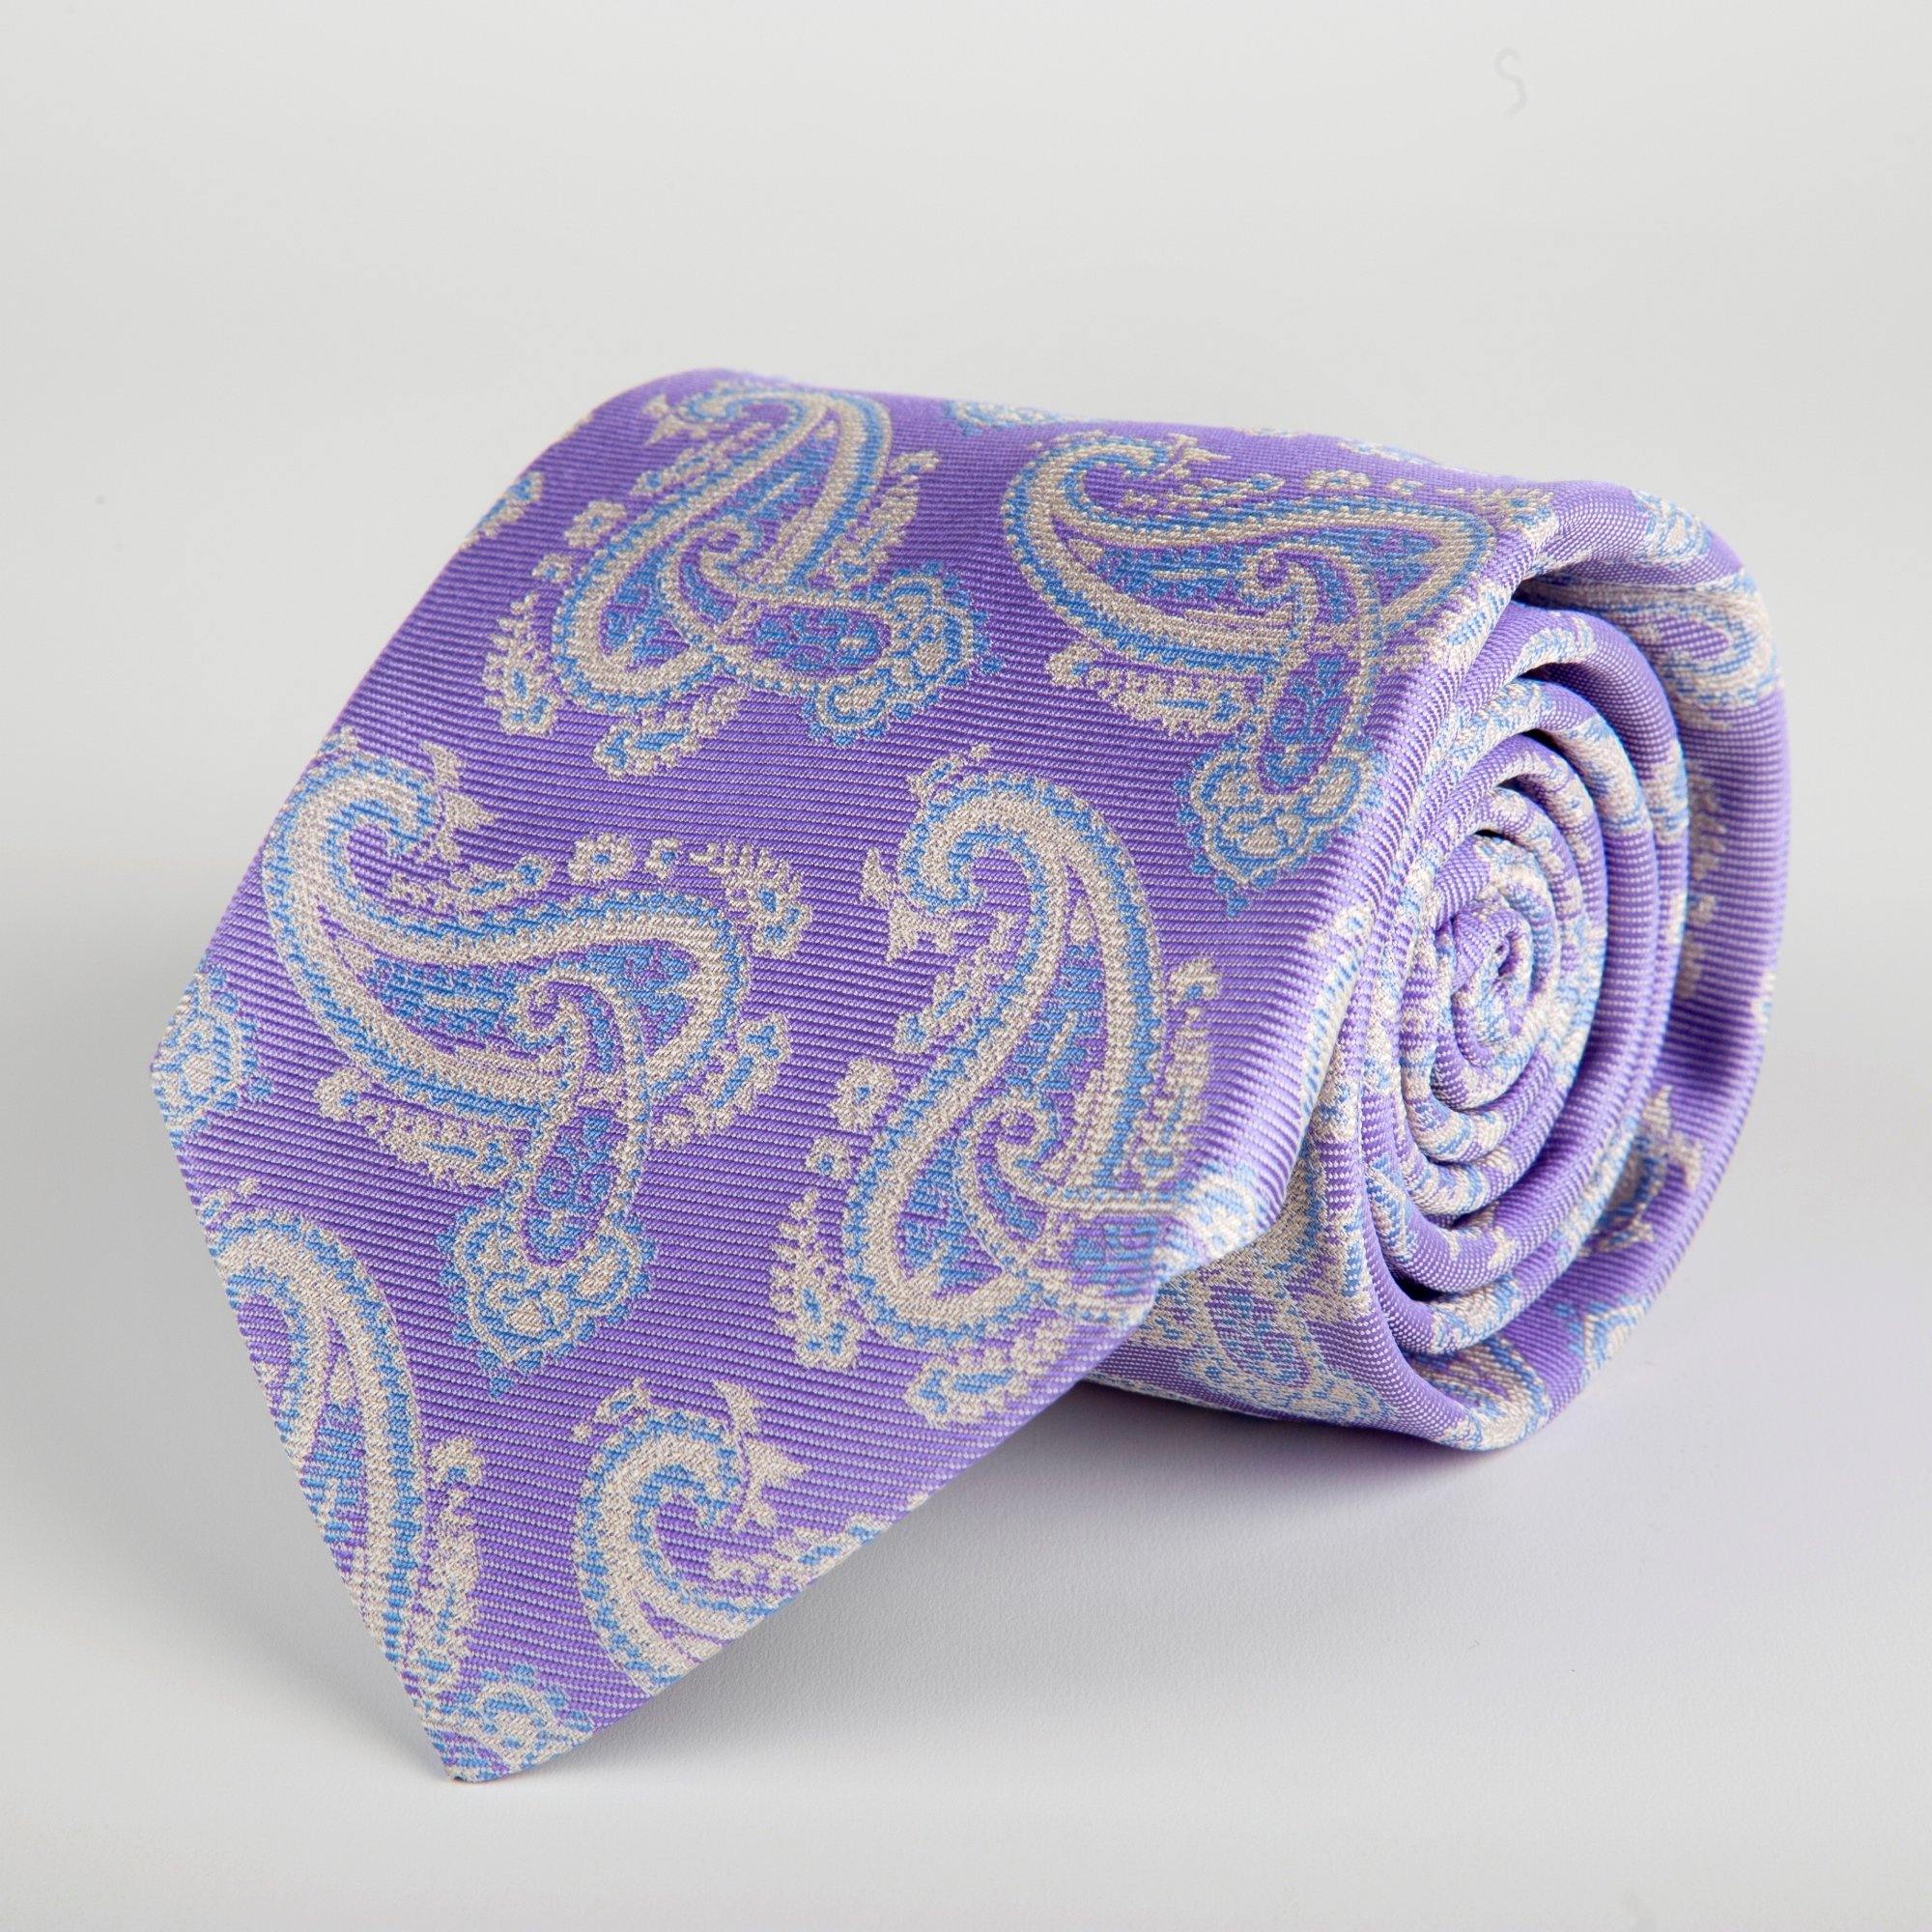 Purple Floral Paisley Woven Silk Tie Hand Finished - British Made